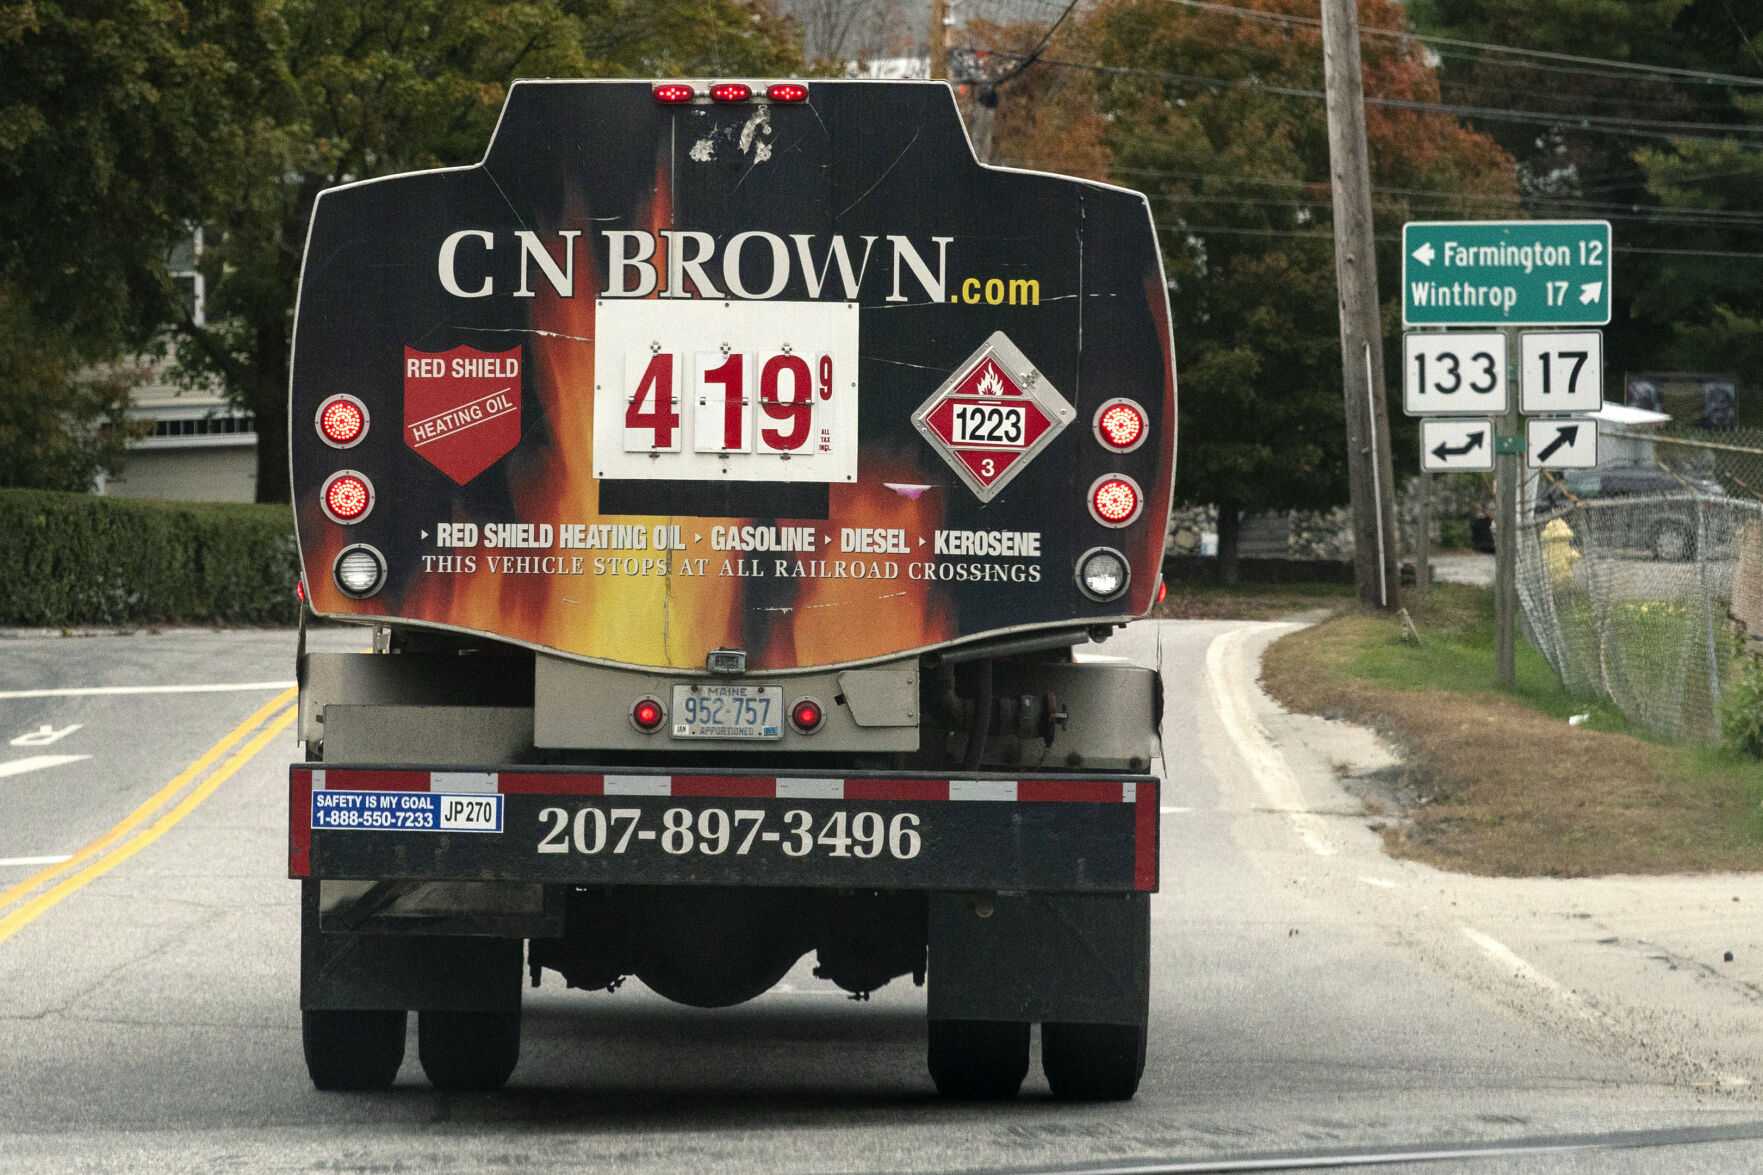 <p>FILE - A fuel delivery truck advertises its price for a gallon of heating oil, Oct. 5, 2022 in Livermore Falls, Maine. The Labor Department releases the Producer Price Index for October on Tuesday. (AP Photo/Robert F. Bukaty, File)</p>   PHOTO CREDIT: Robert F. Bukaty 